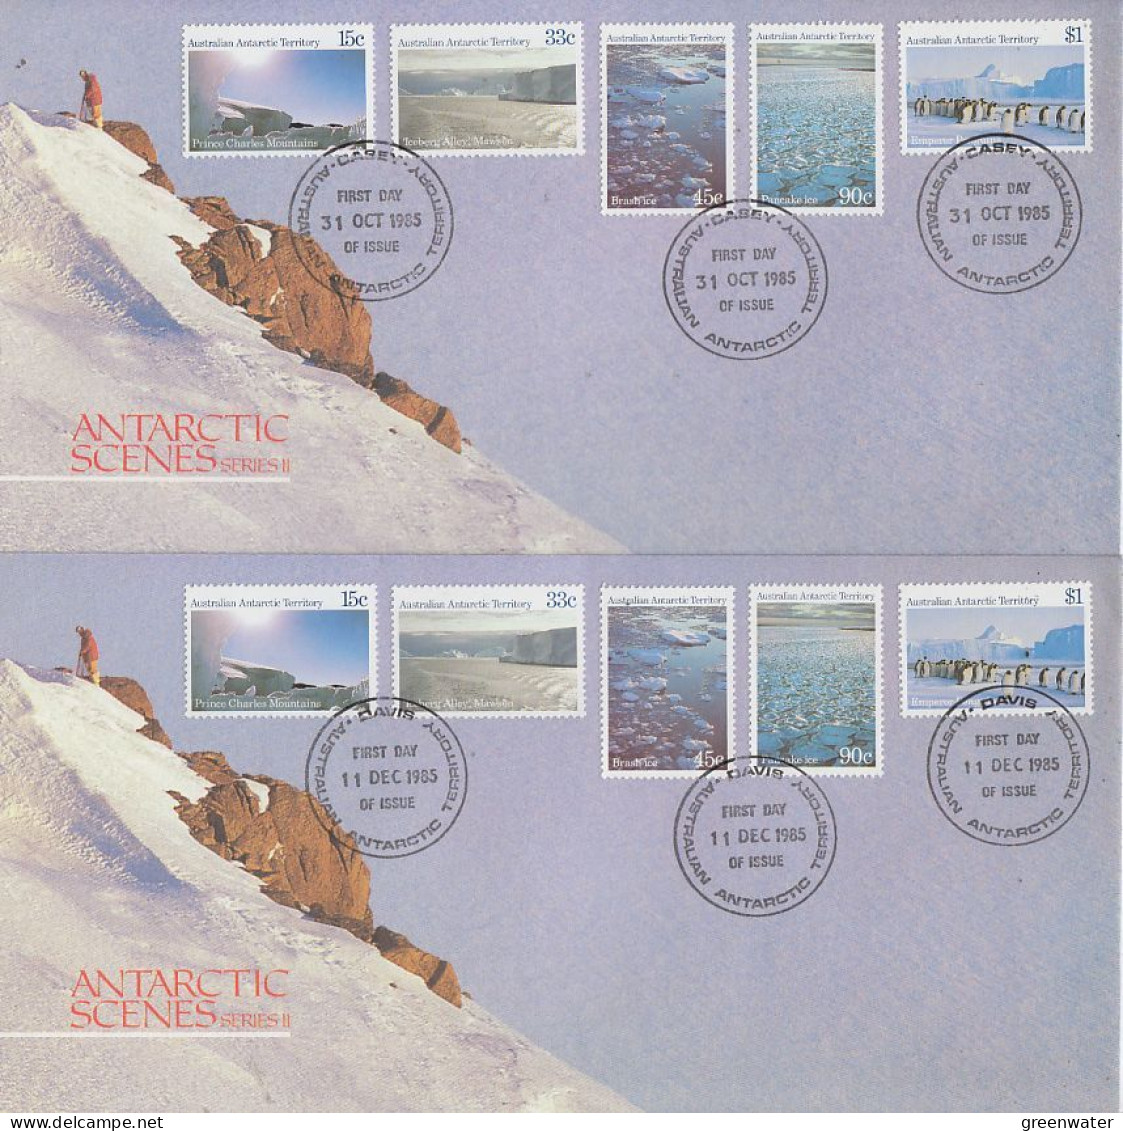 AAT 1985  Landscapes 5v 3 FDC (OO181) - FDC